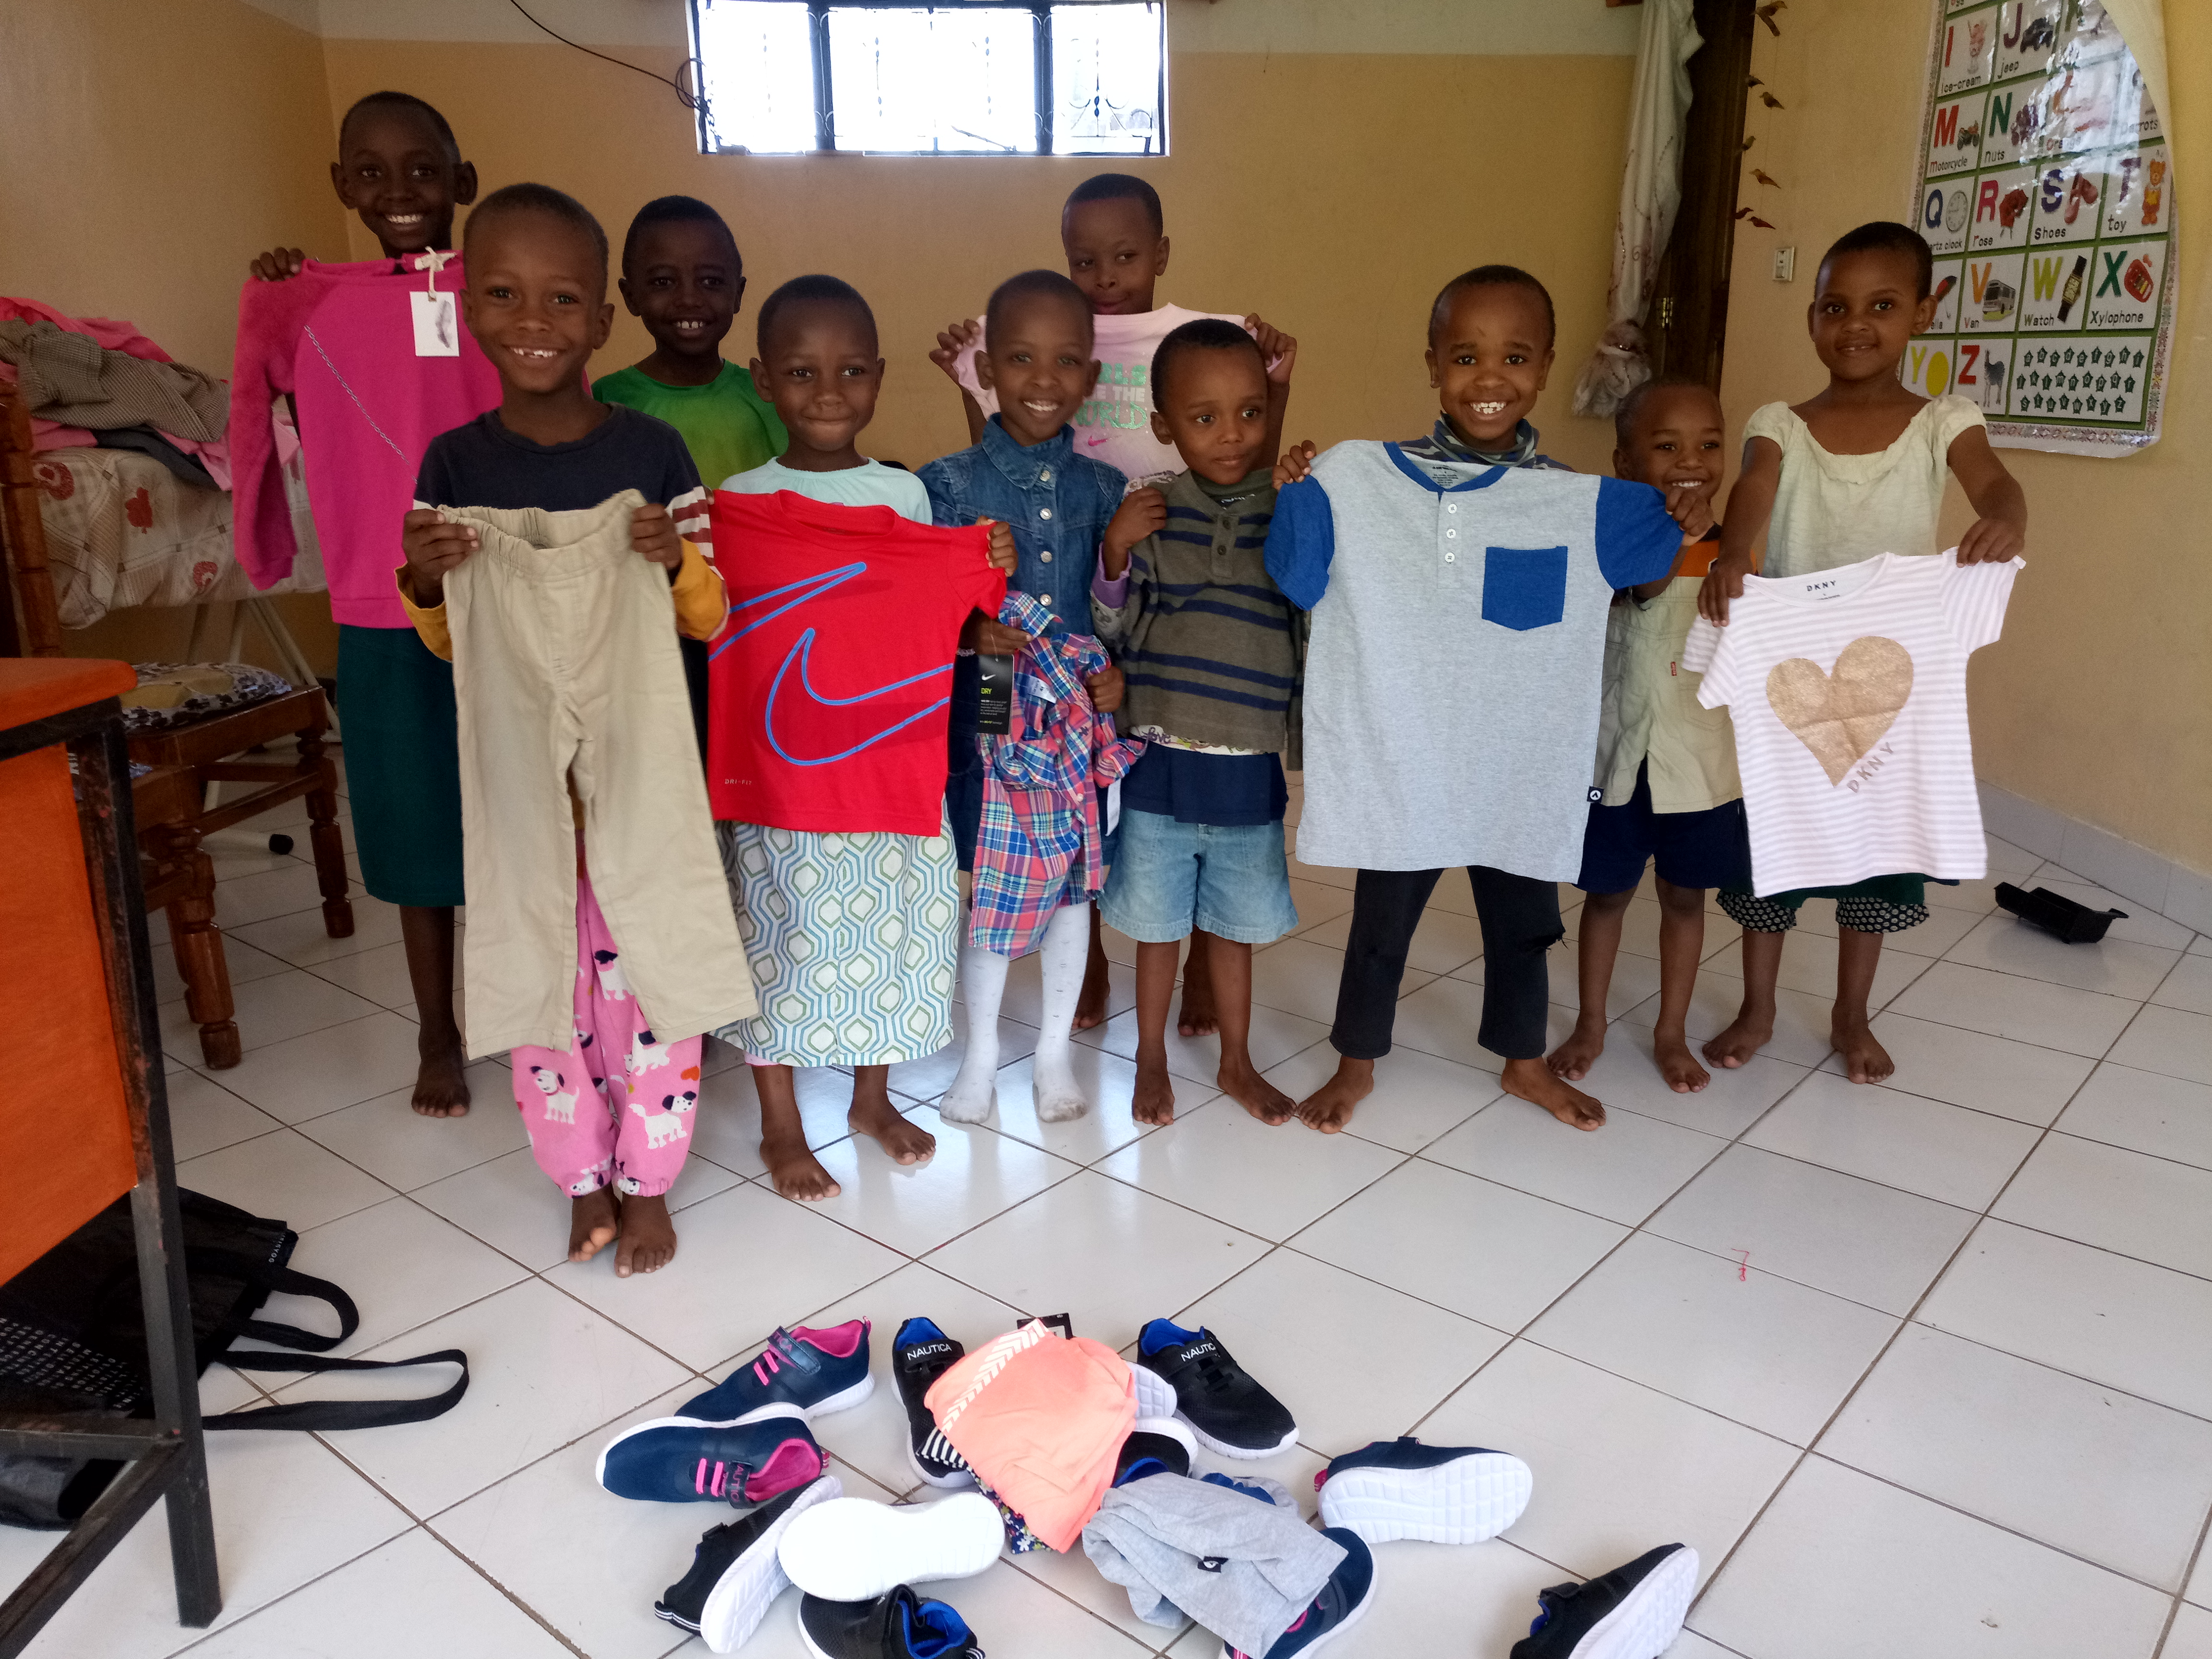 Children at the Orphanage in Tanzania